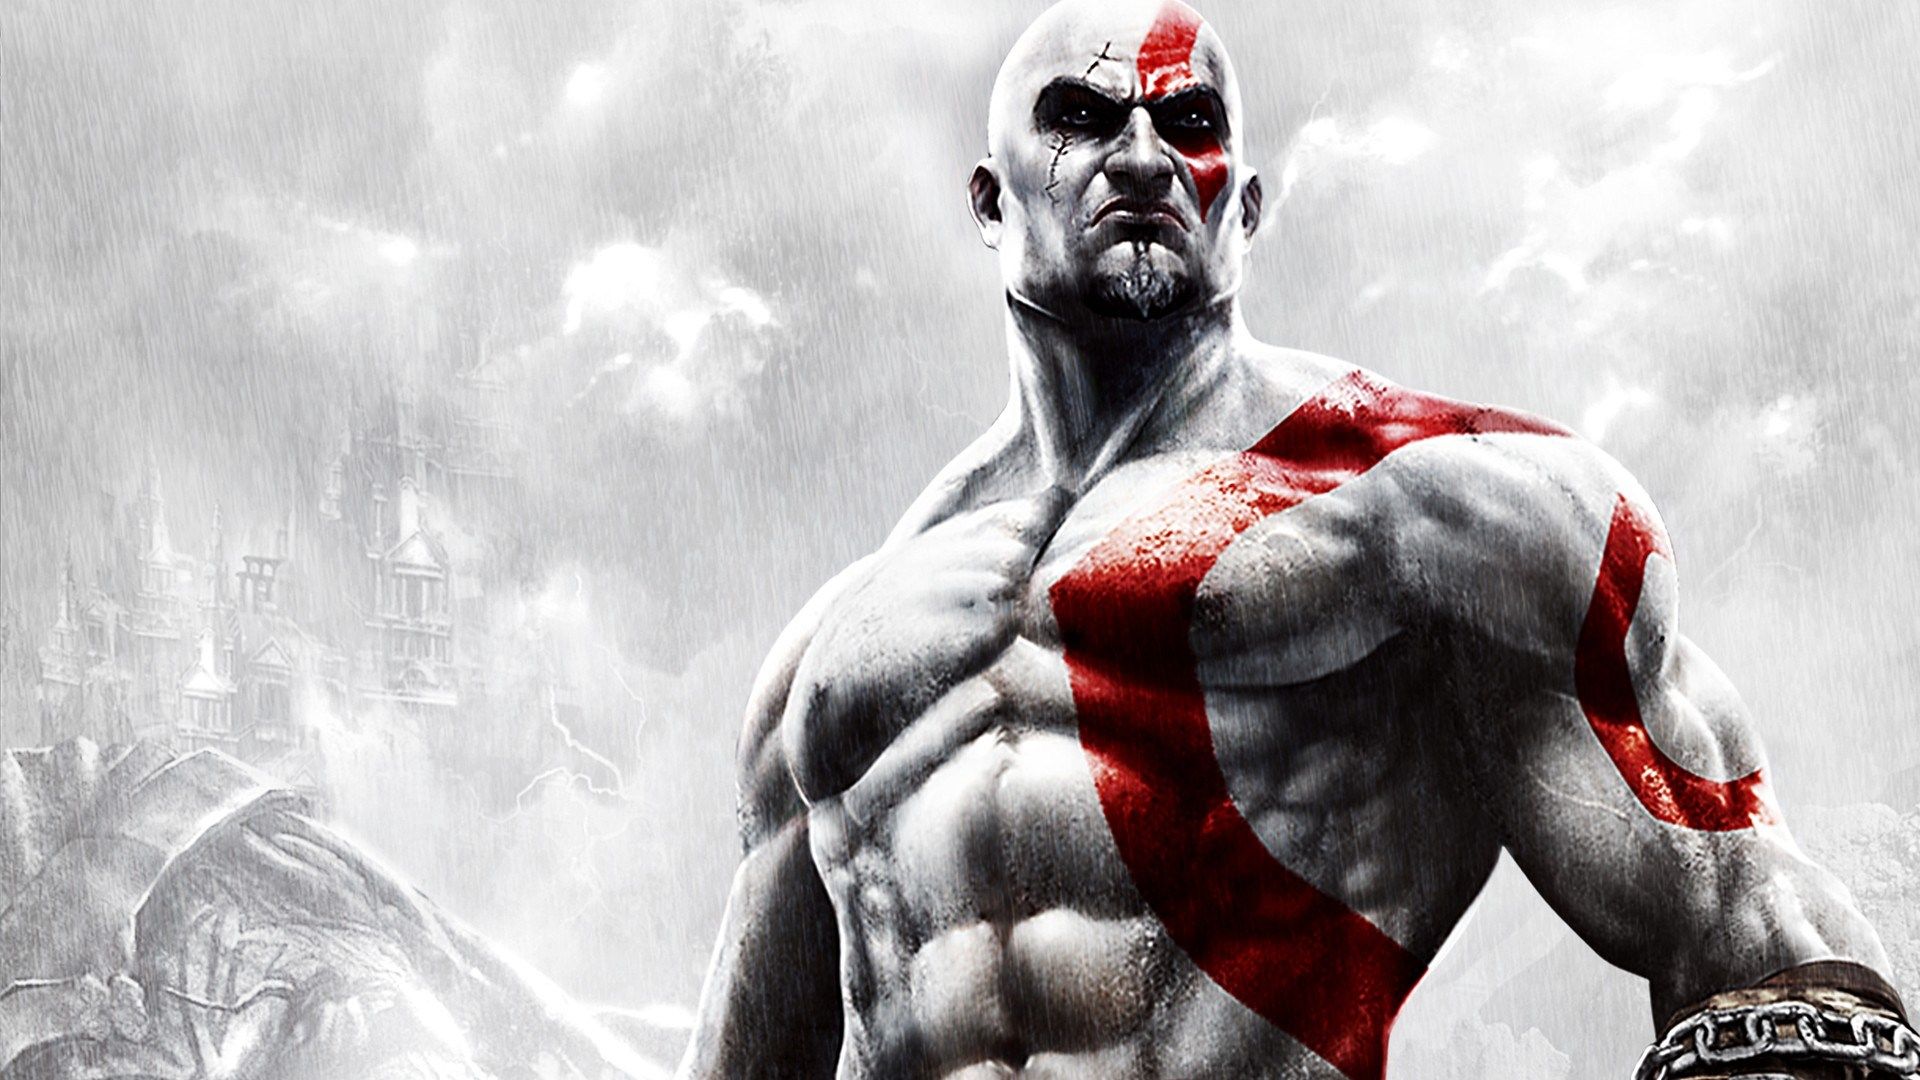 1920x1080 God of War: Chains of Olympus game wallpaper